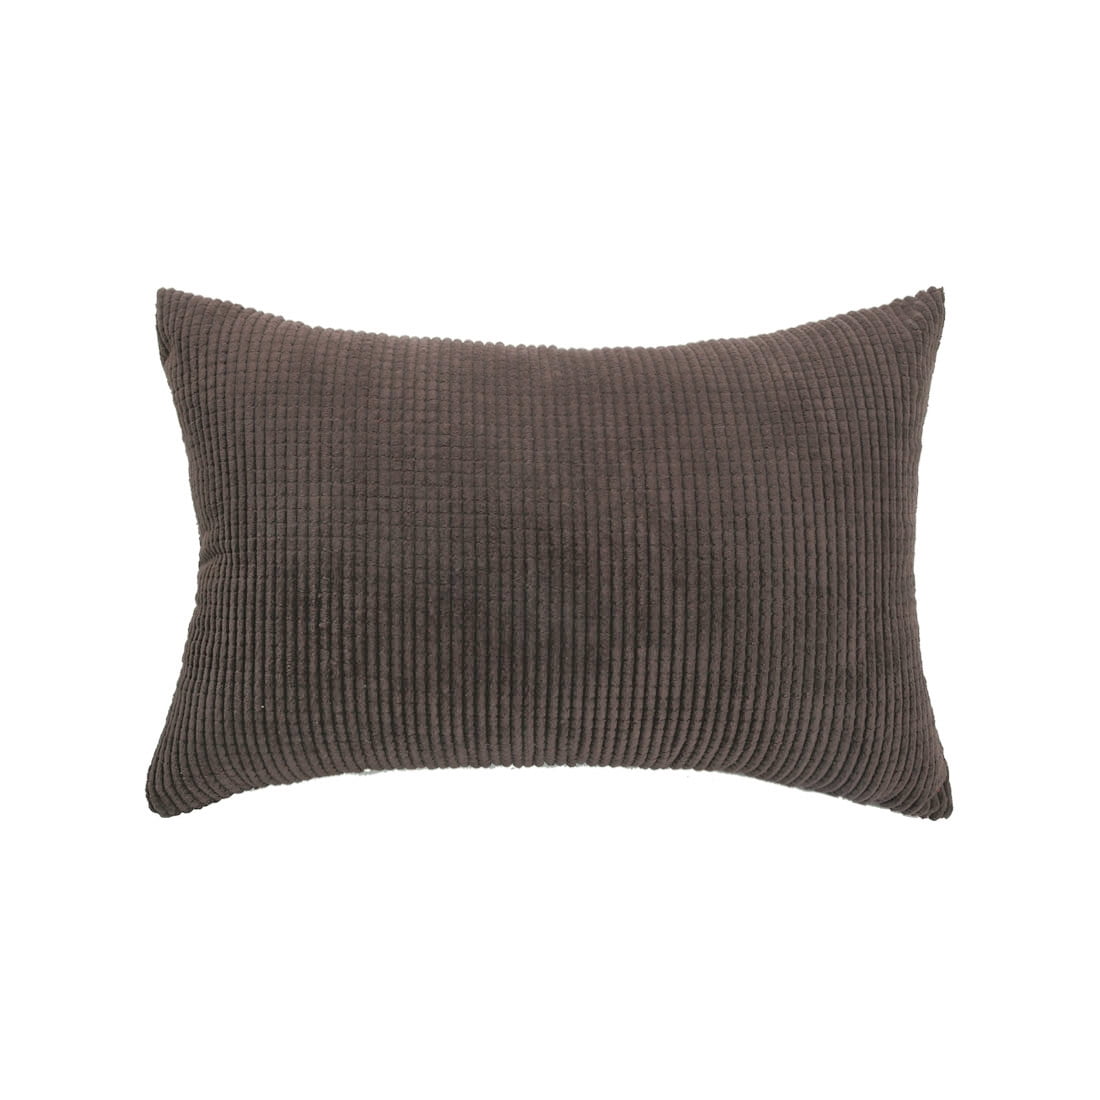 CHARCOAL GREY 100% COTTON VELVET OBLONG CUSHION COVER Limited Stock 